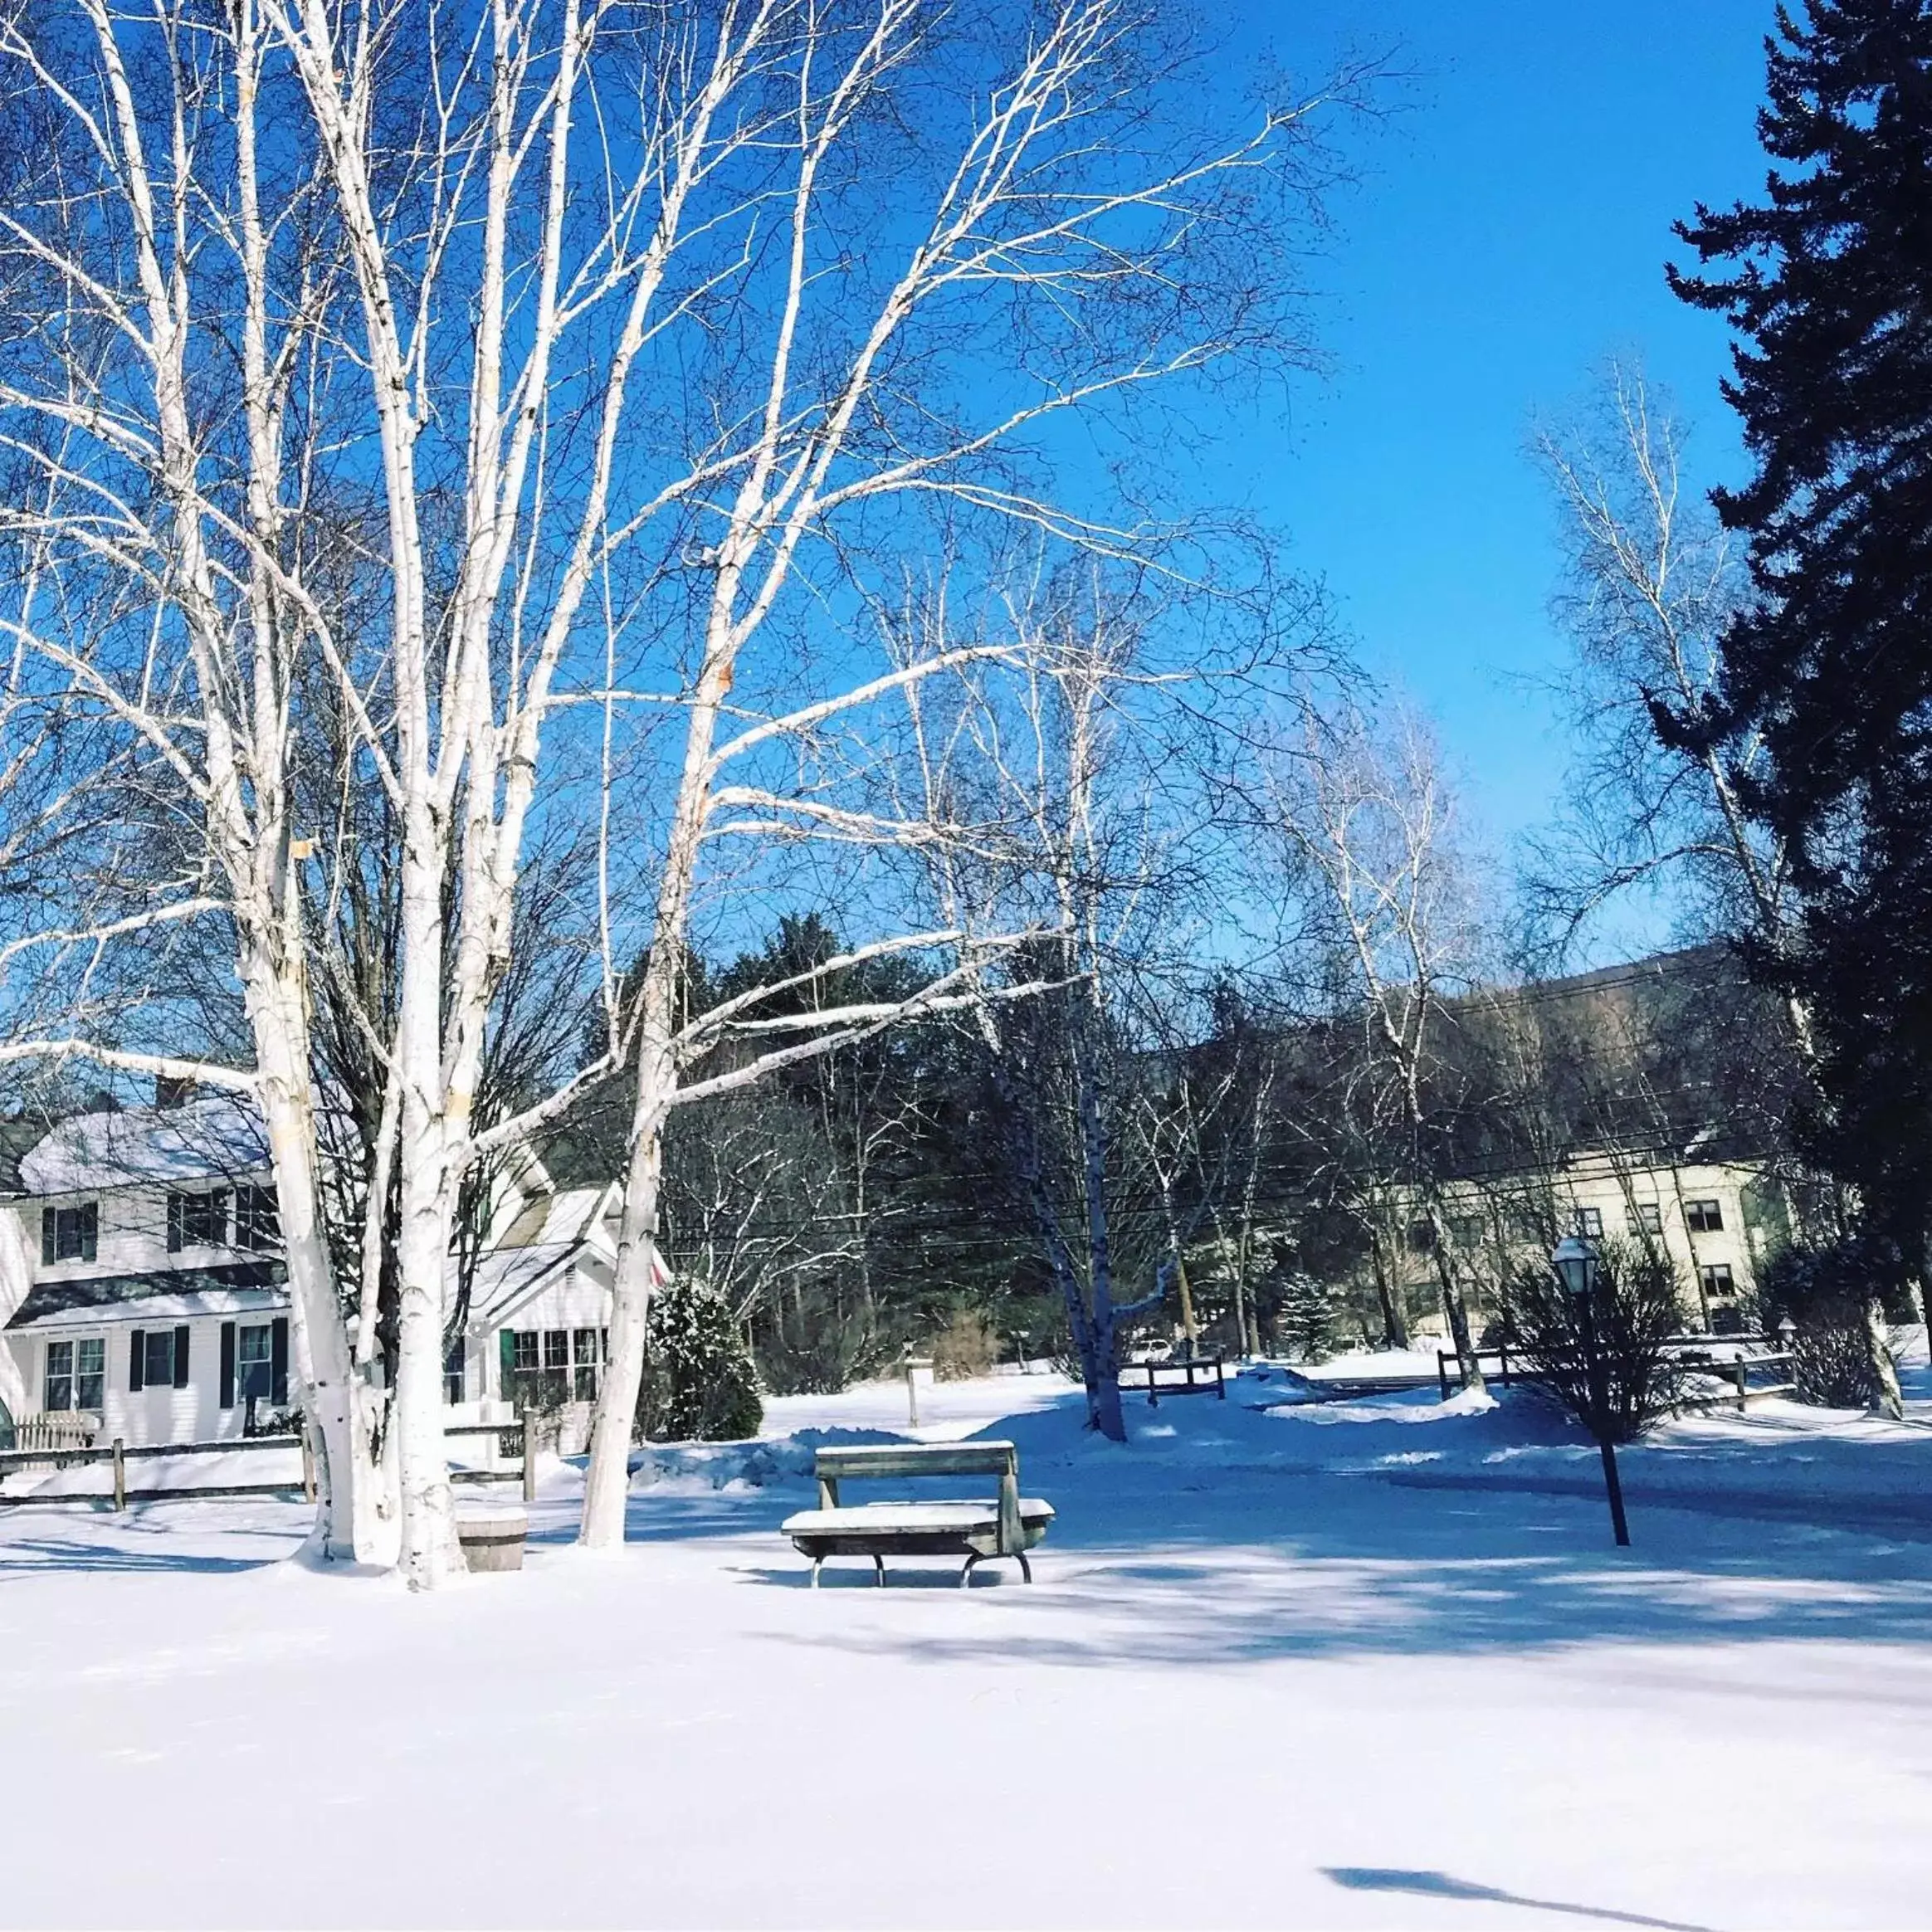 Winter in Aspen at Manchester